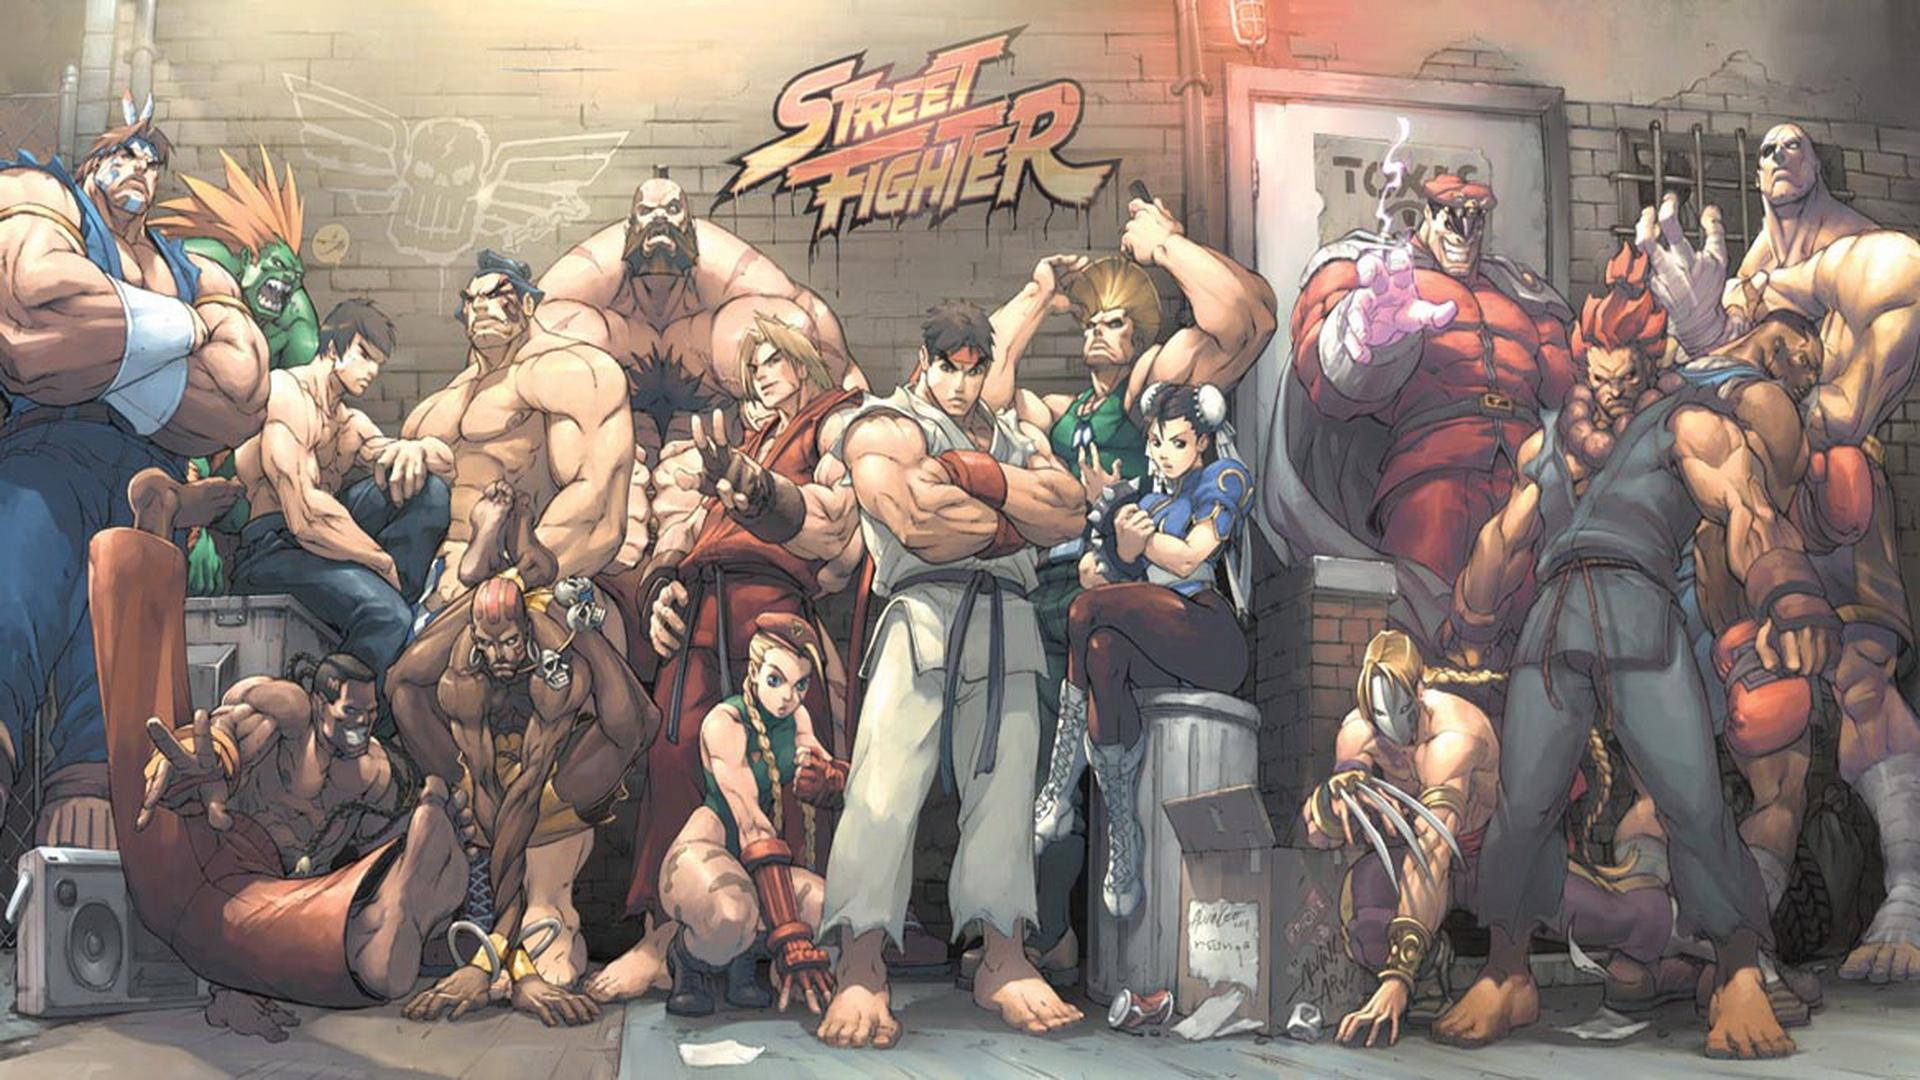 Street Fighter On A Brick Wall Background